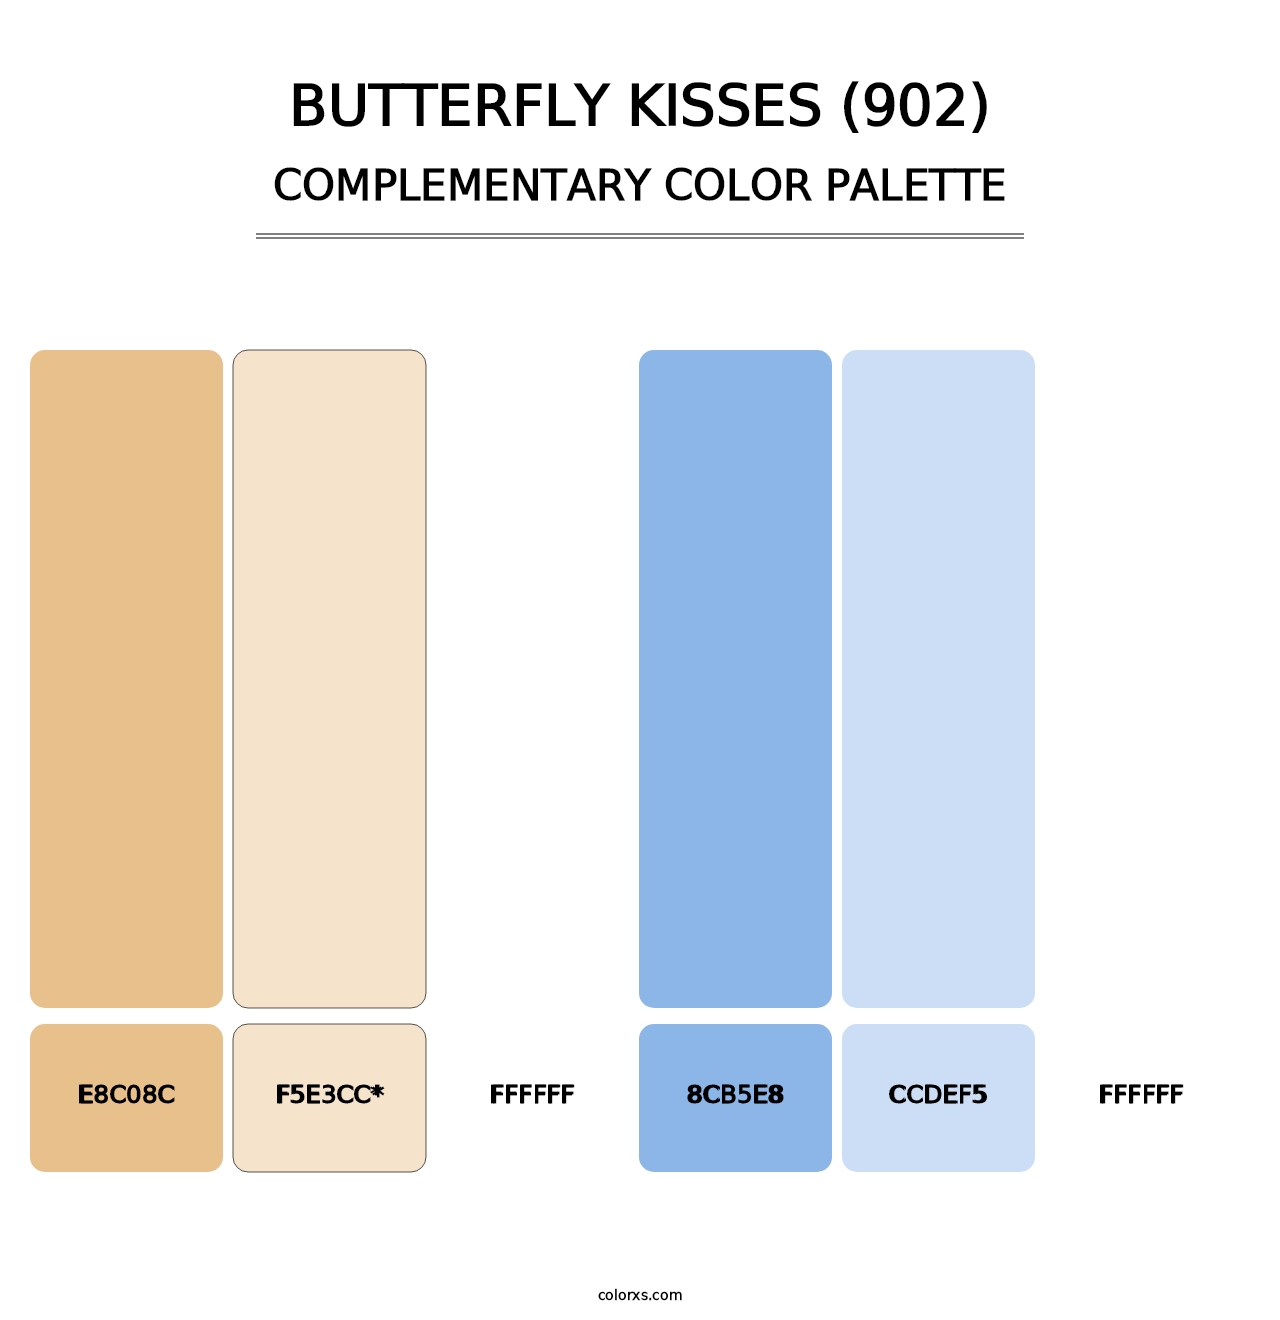 Butterfly Kisses (902) - Complementary Color Palette